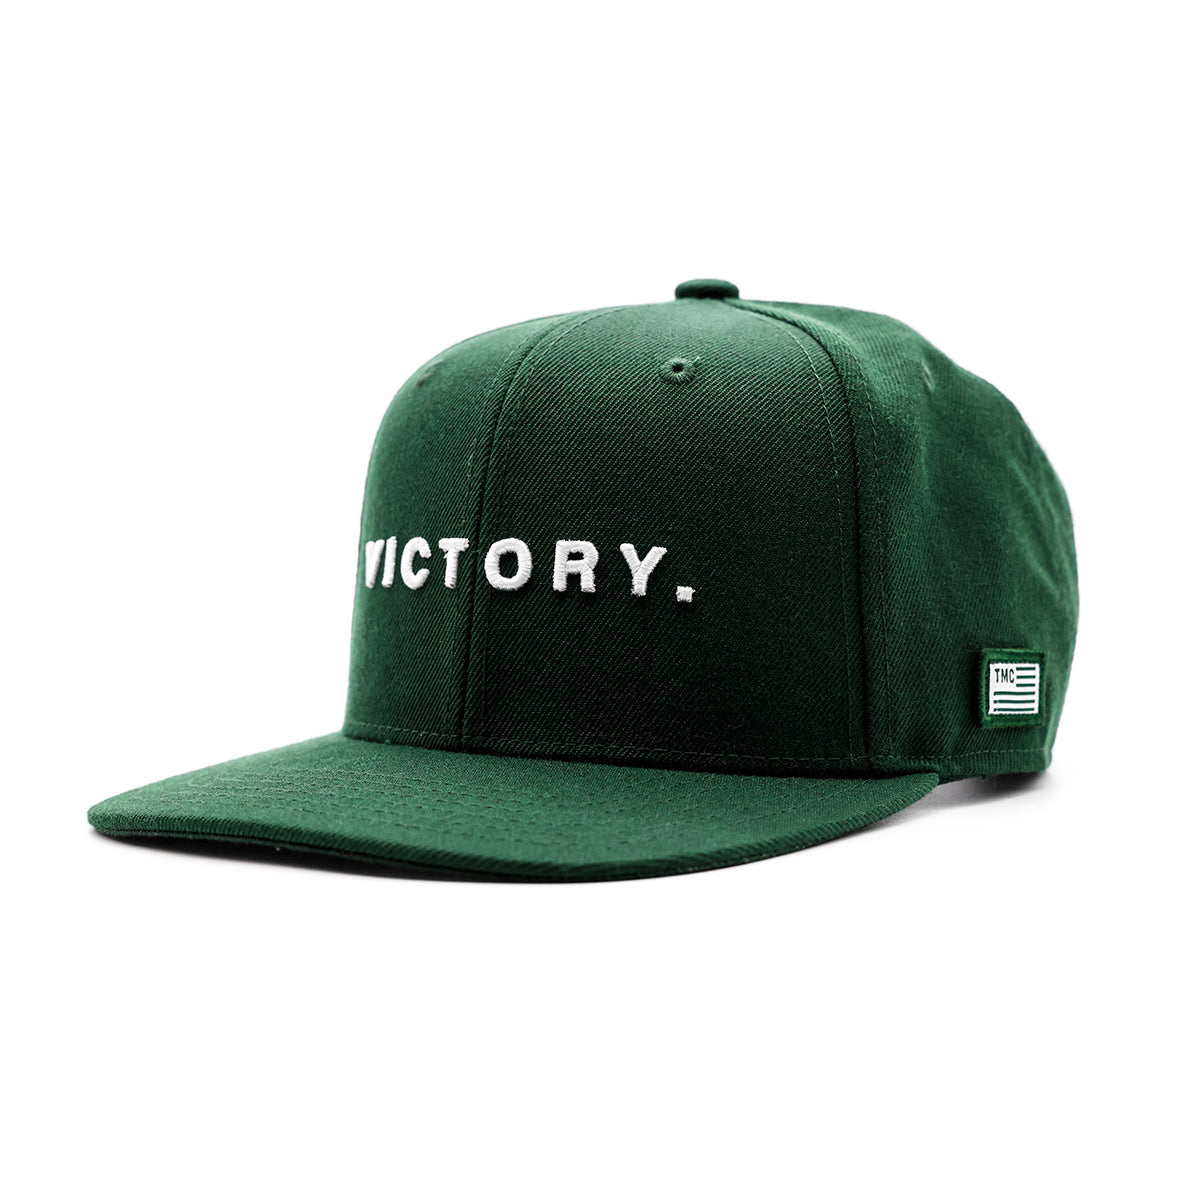 Victory Limited Edition Snapback - Green/White - Angle